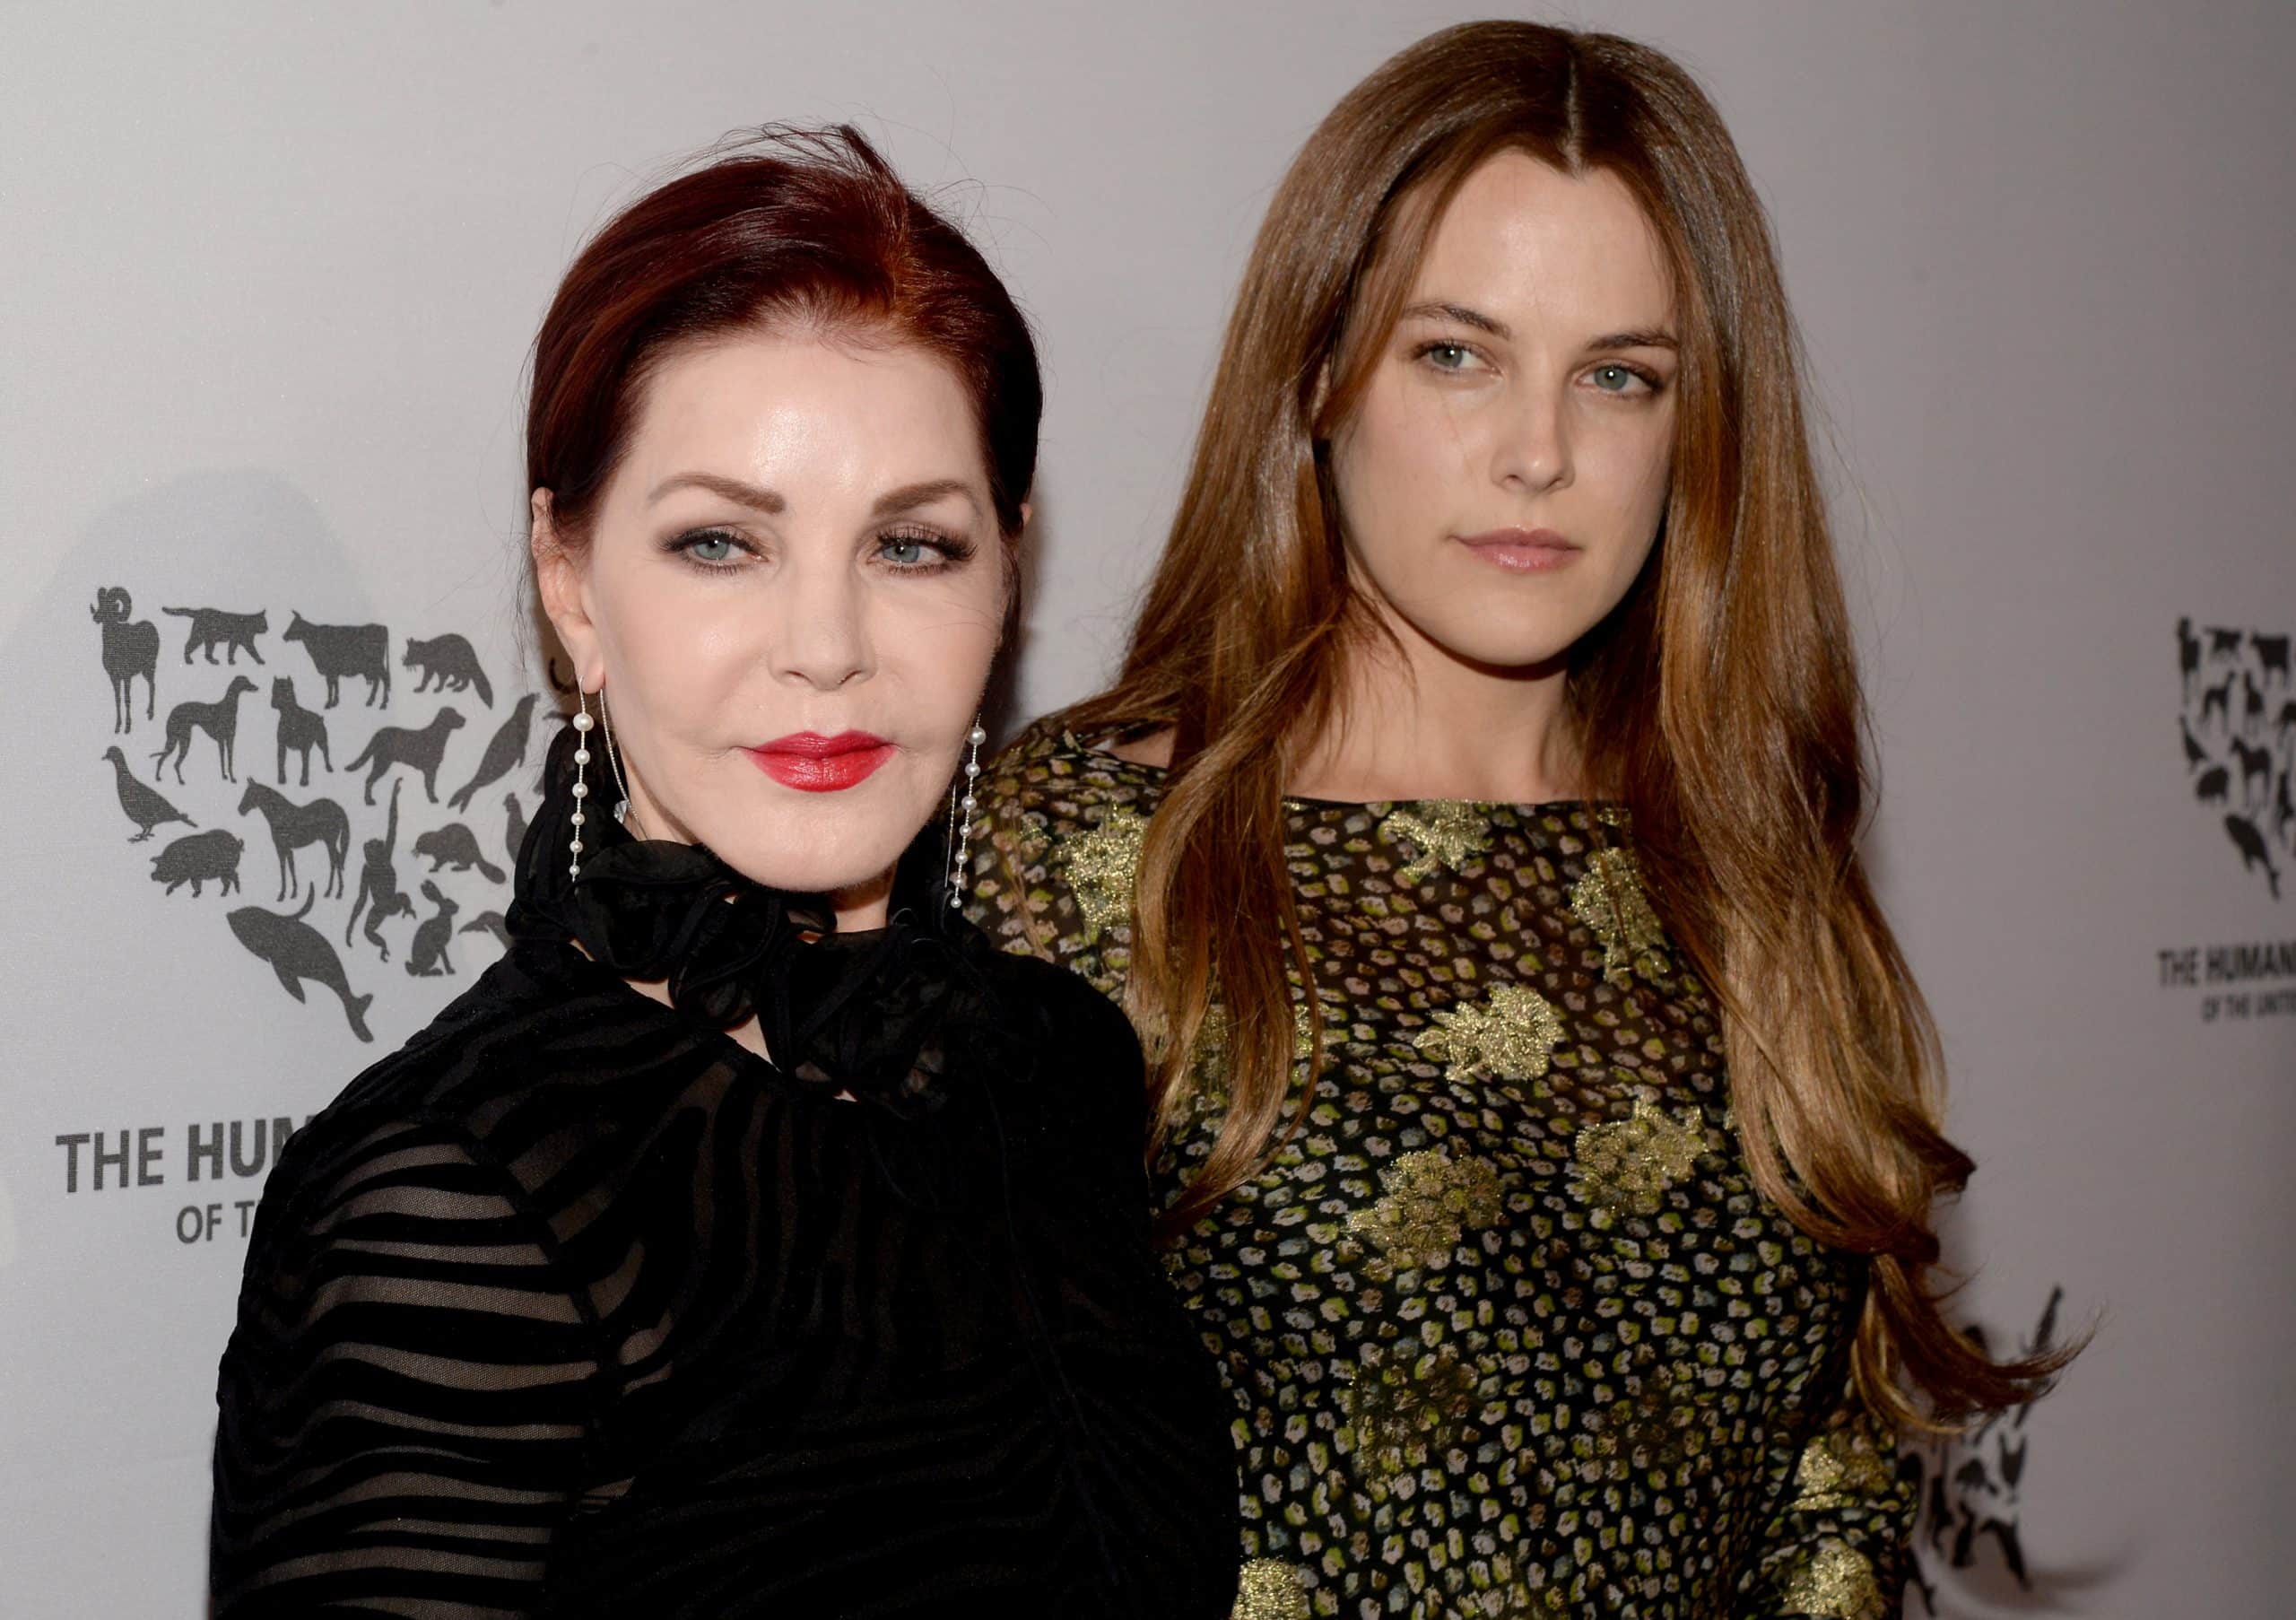 Lisa Marie Presley's mother and daughter, Priscilla Presley and Riley Keough